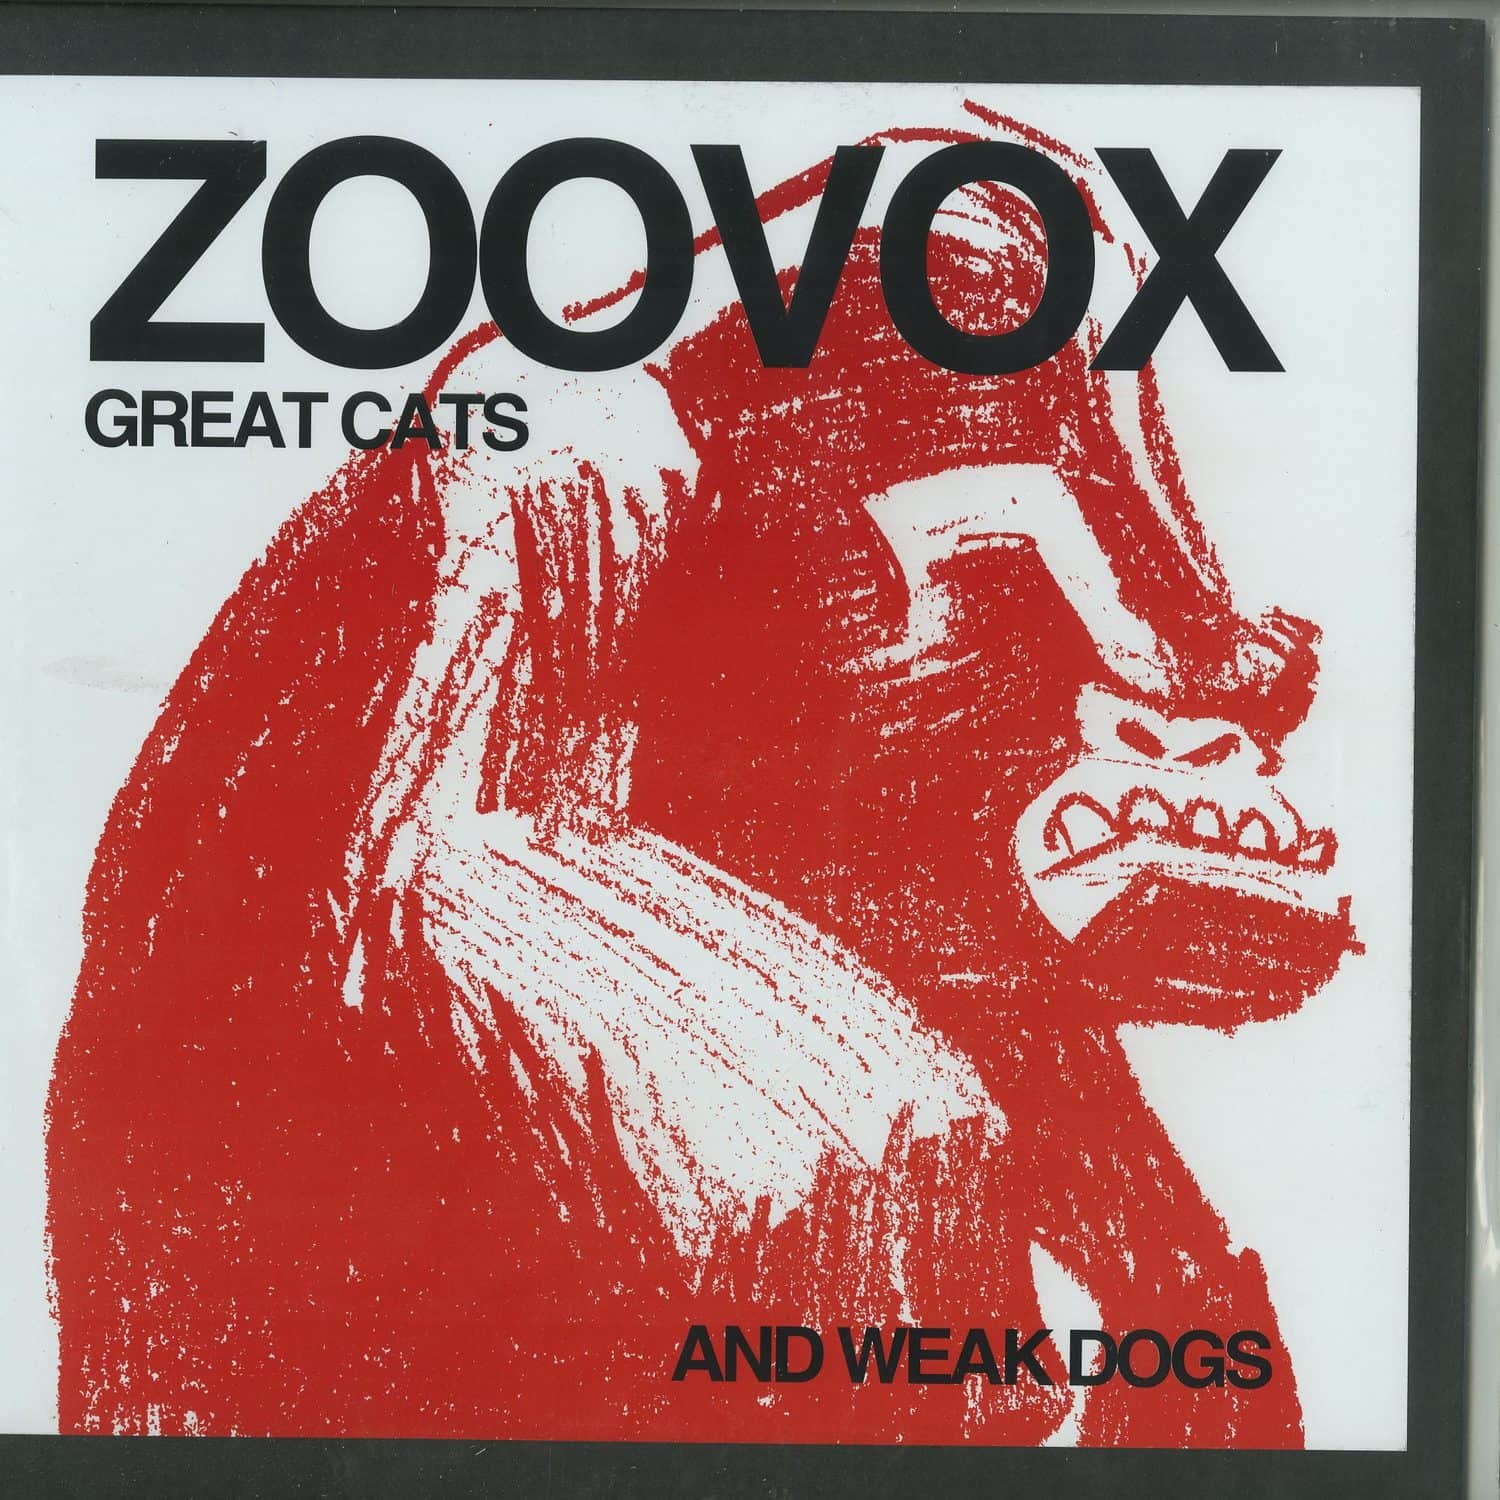 Zoovox - GREAT CATS AND WEAK DOGS 